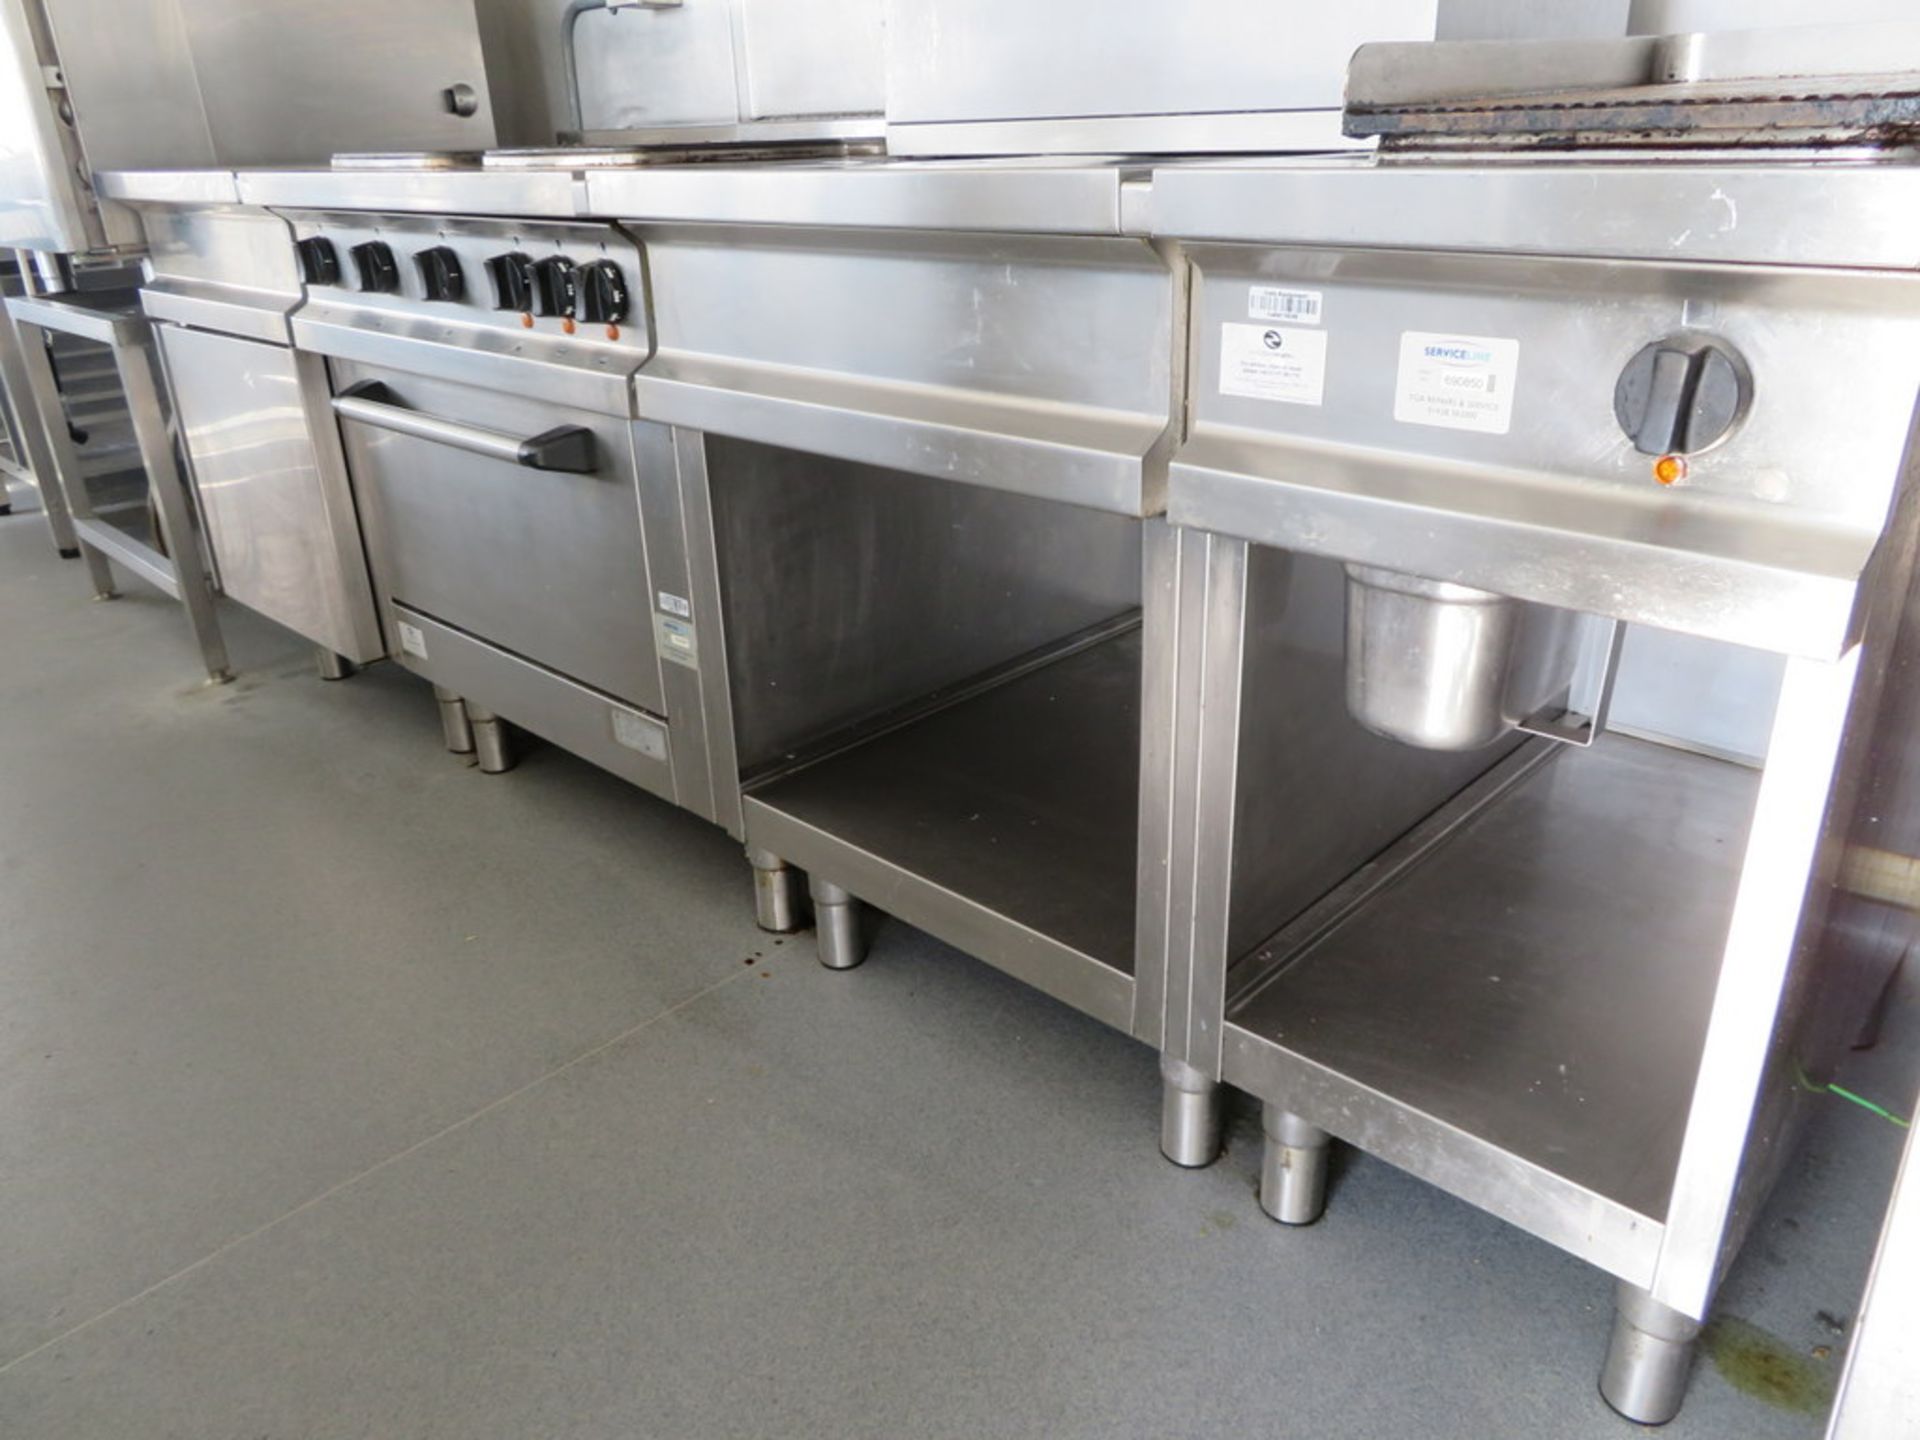 EXCLUSIVE RANGES MODEL EHE 80 STAINLESS STEEL COMMERCIAL COOKING RANGE - Image 8 of 10